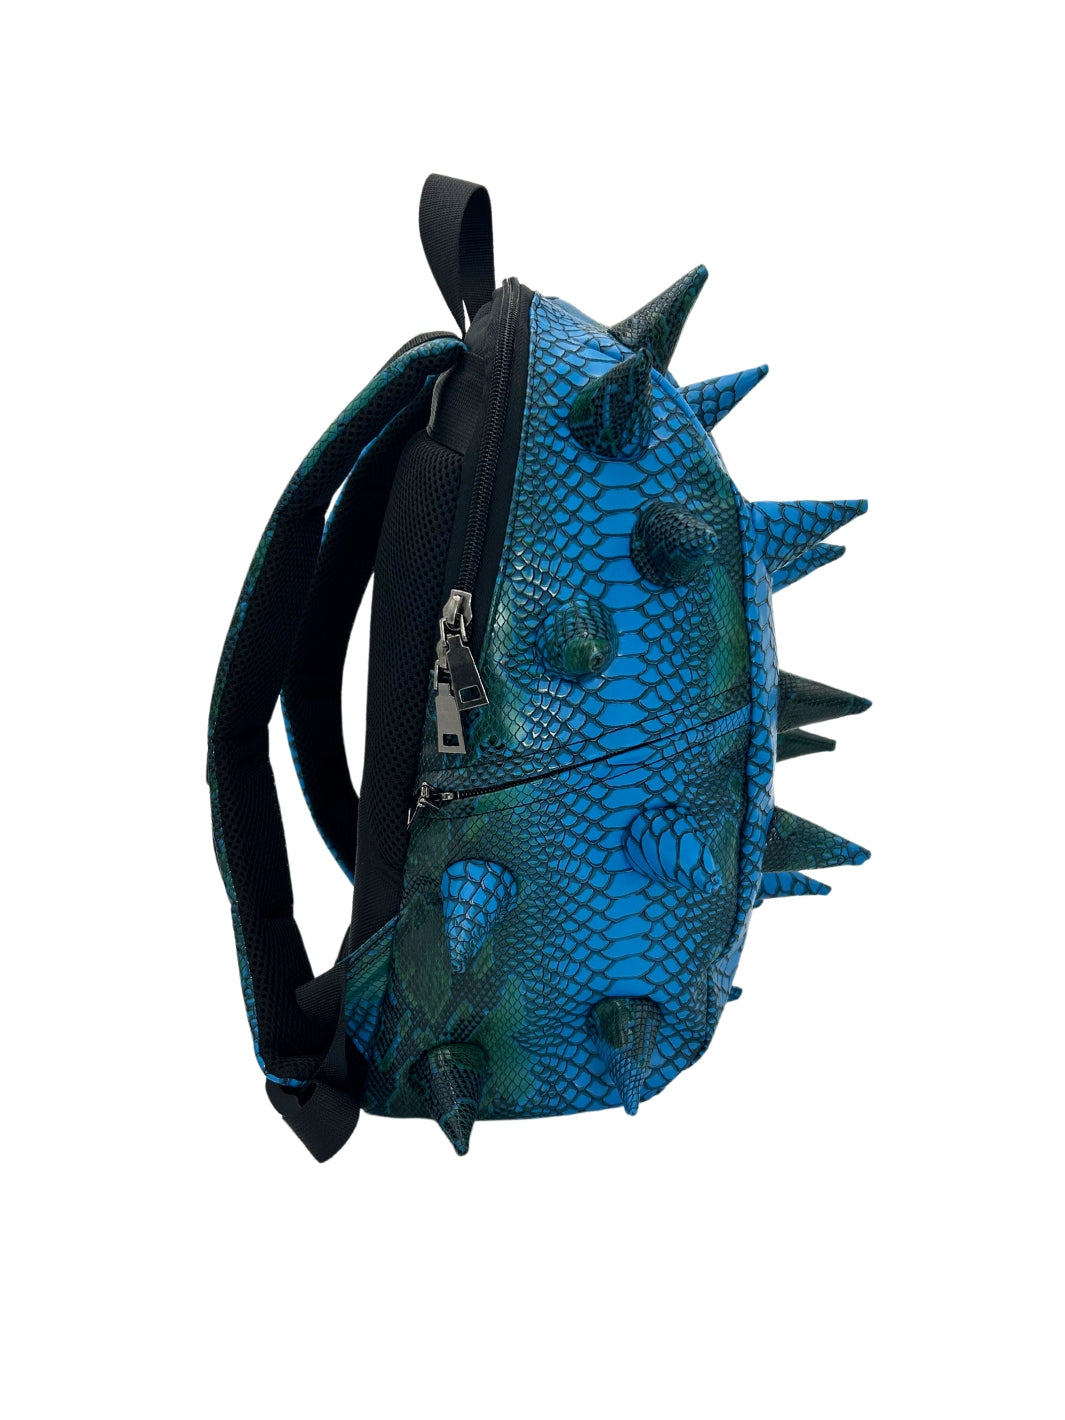 Dinosaur Spike Daypack by Madpax Side View